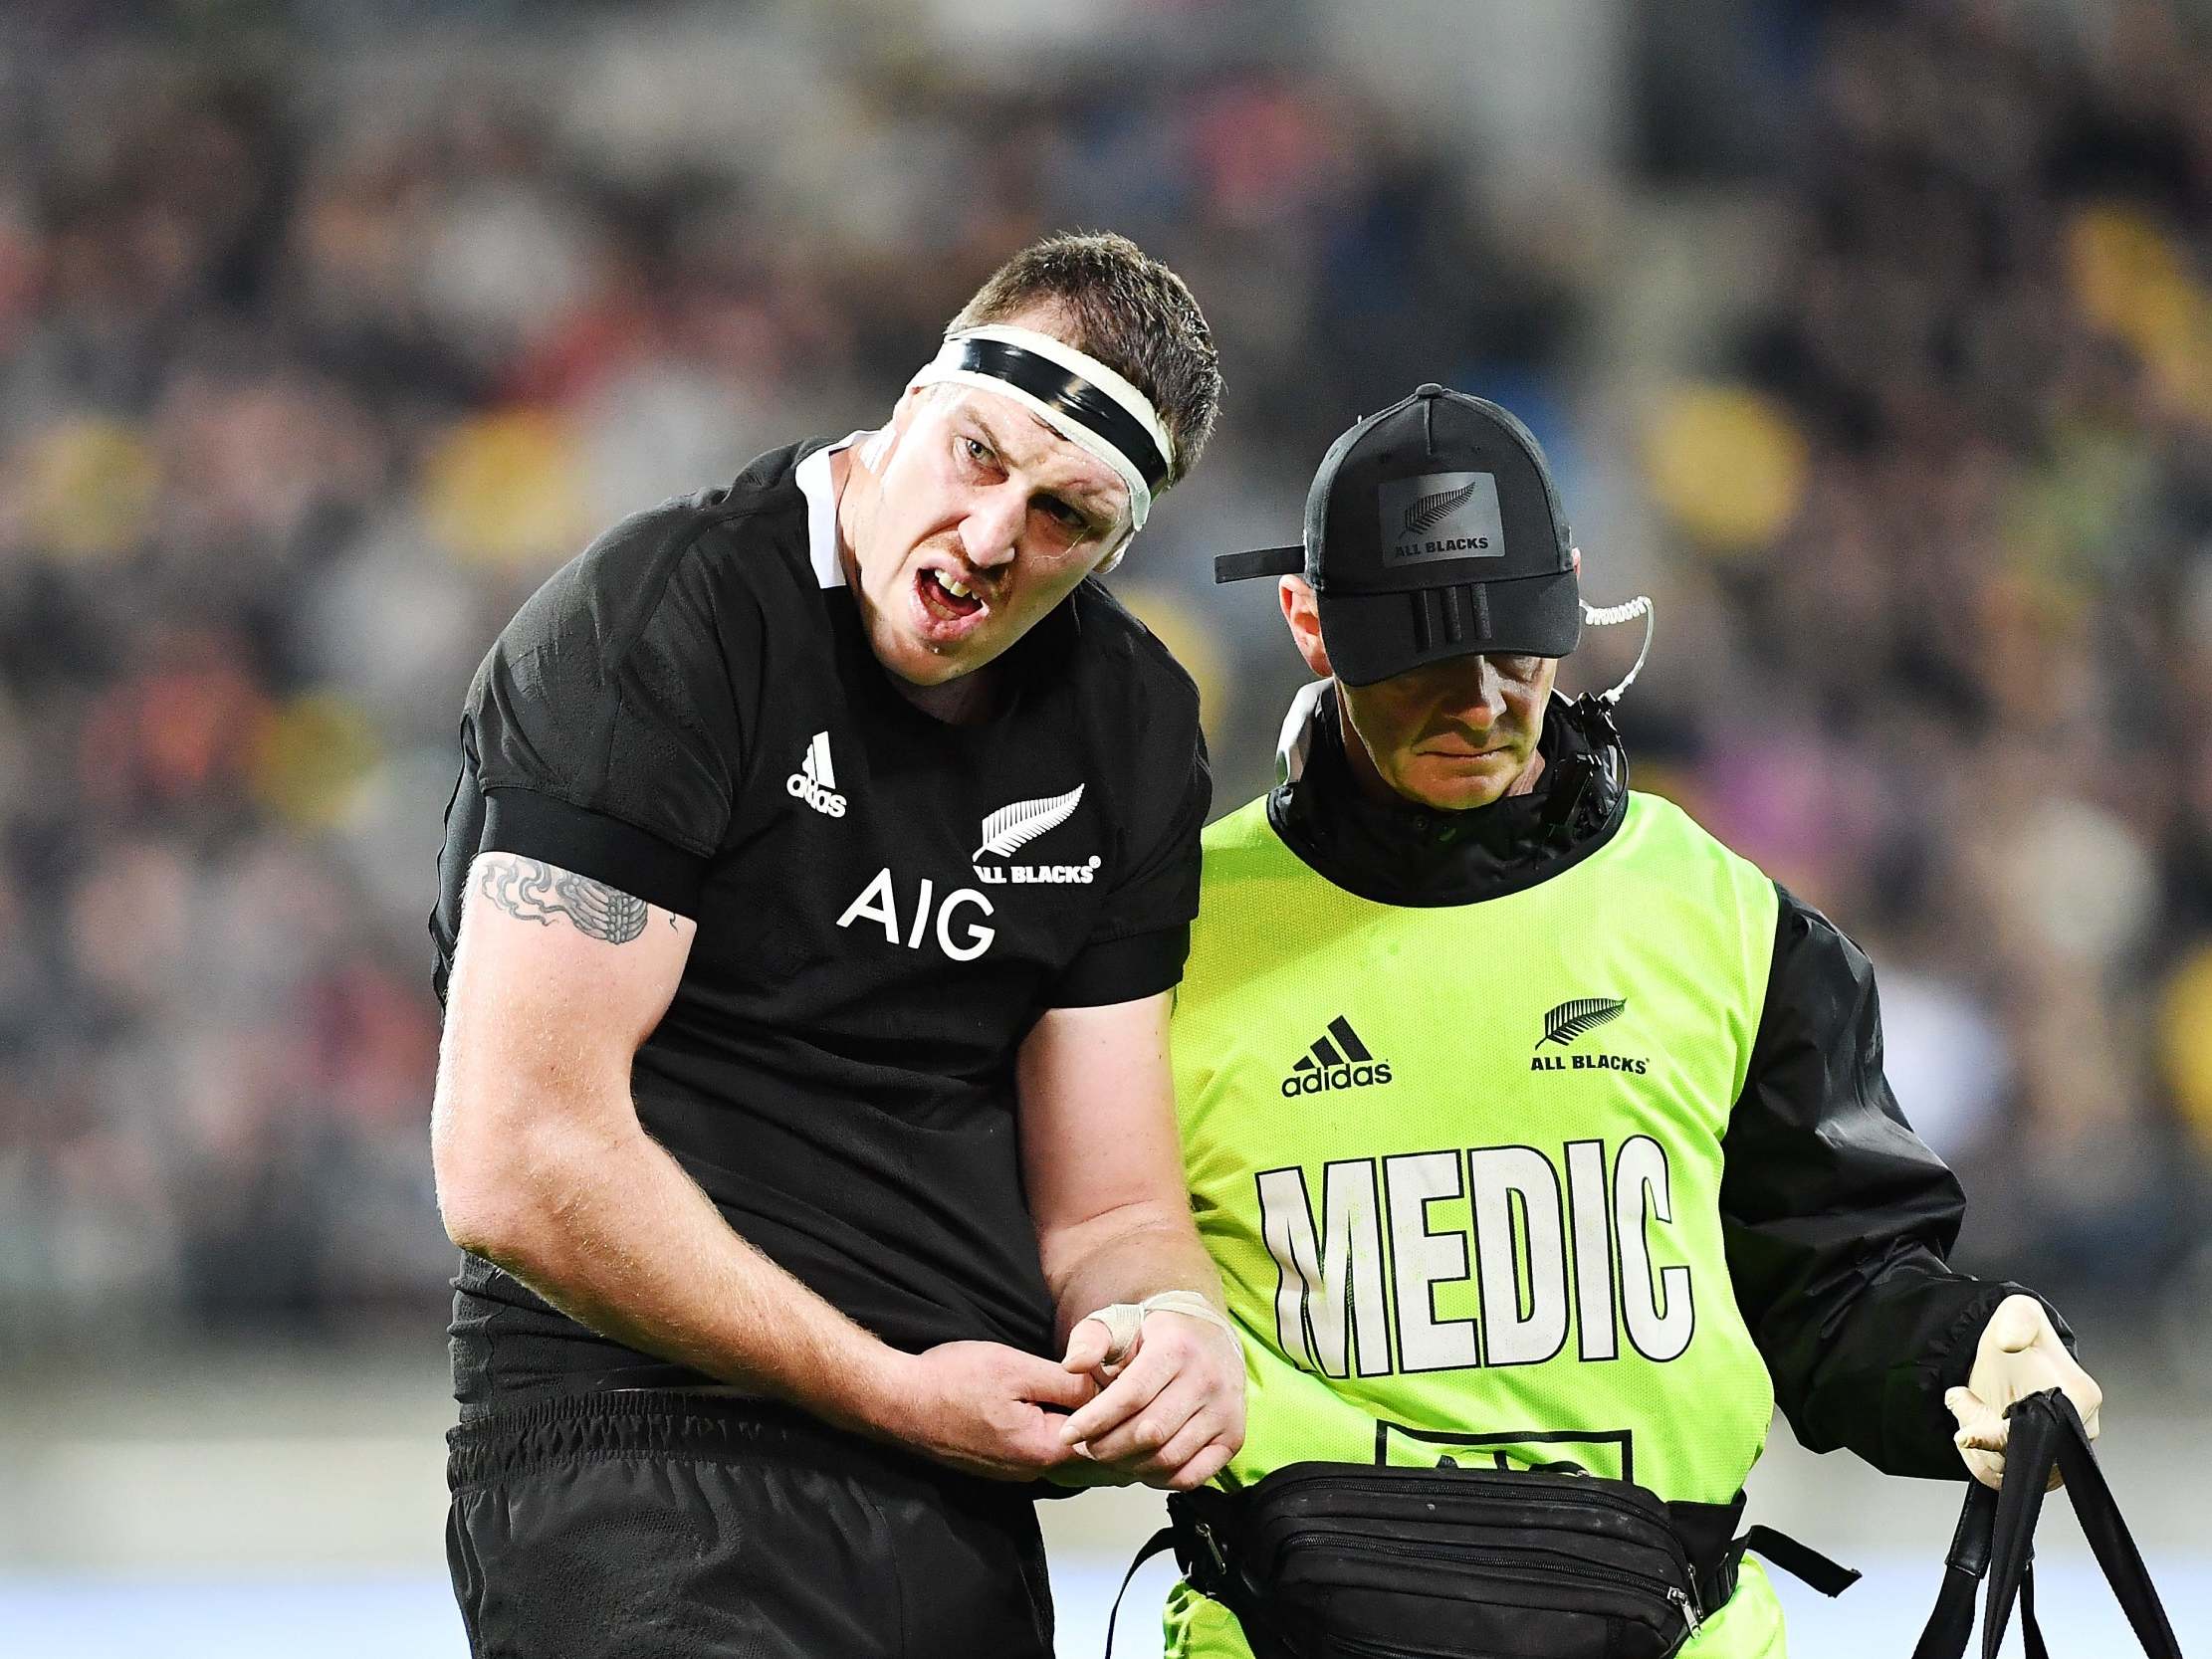 Brodie Retallick suffered a dislocated shoulder in New Zealand's 16-16 draw with South Africa